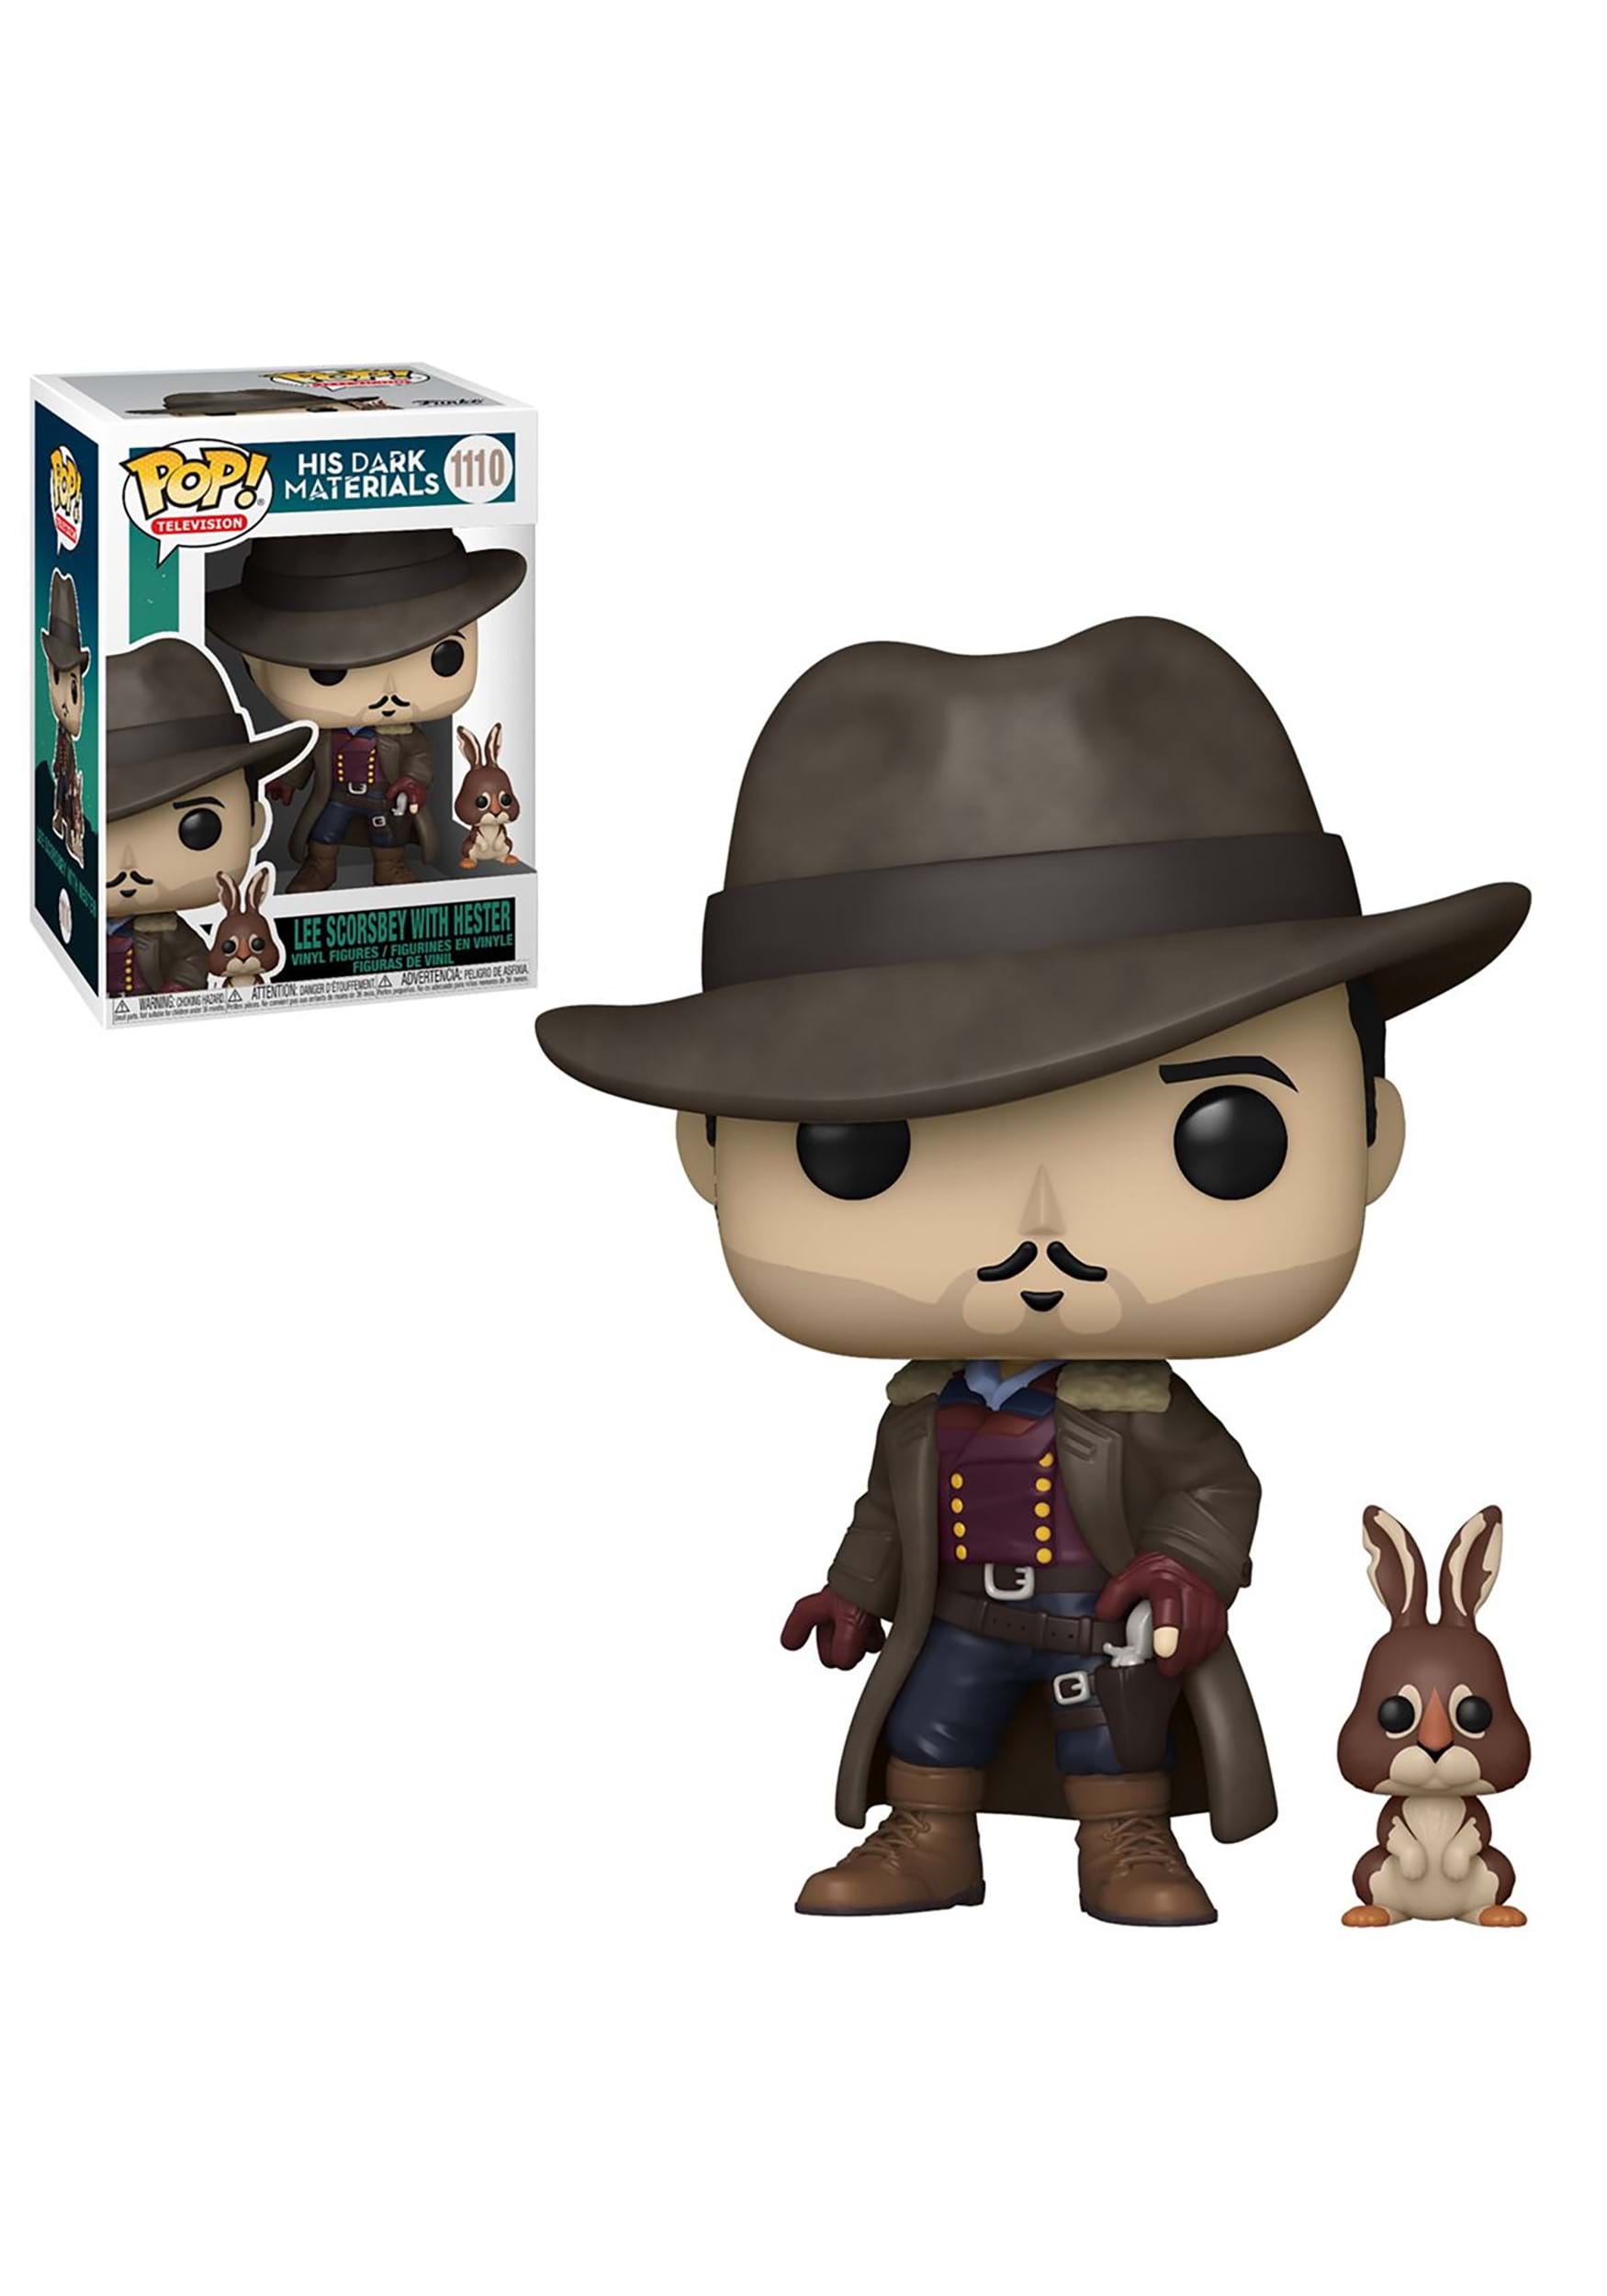 POP! & Buddy: Lee w/Hester from His Dark Materials